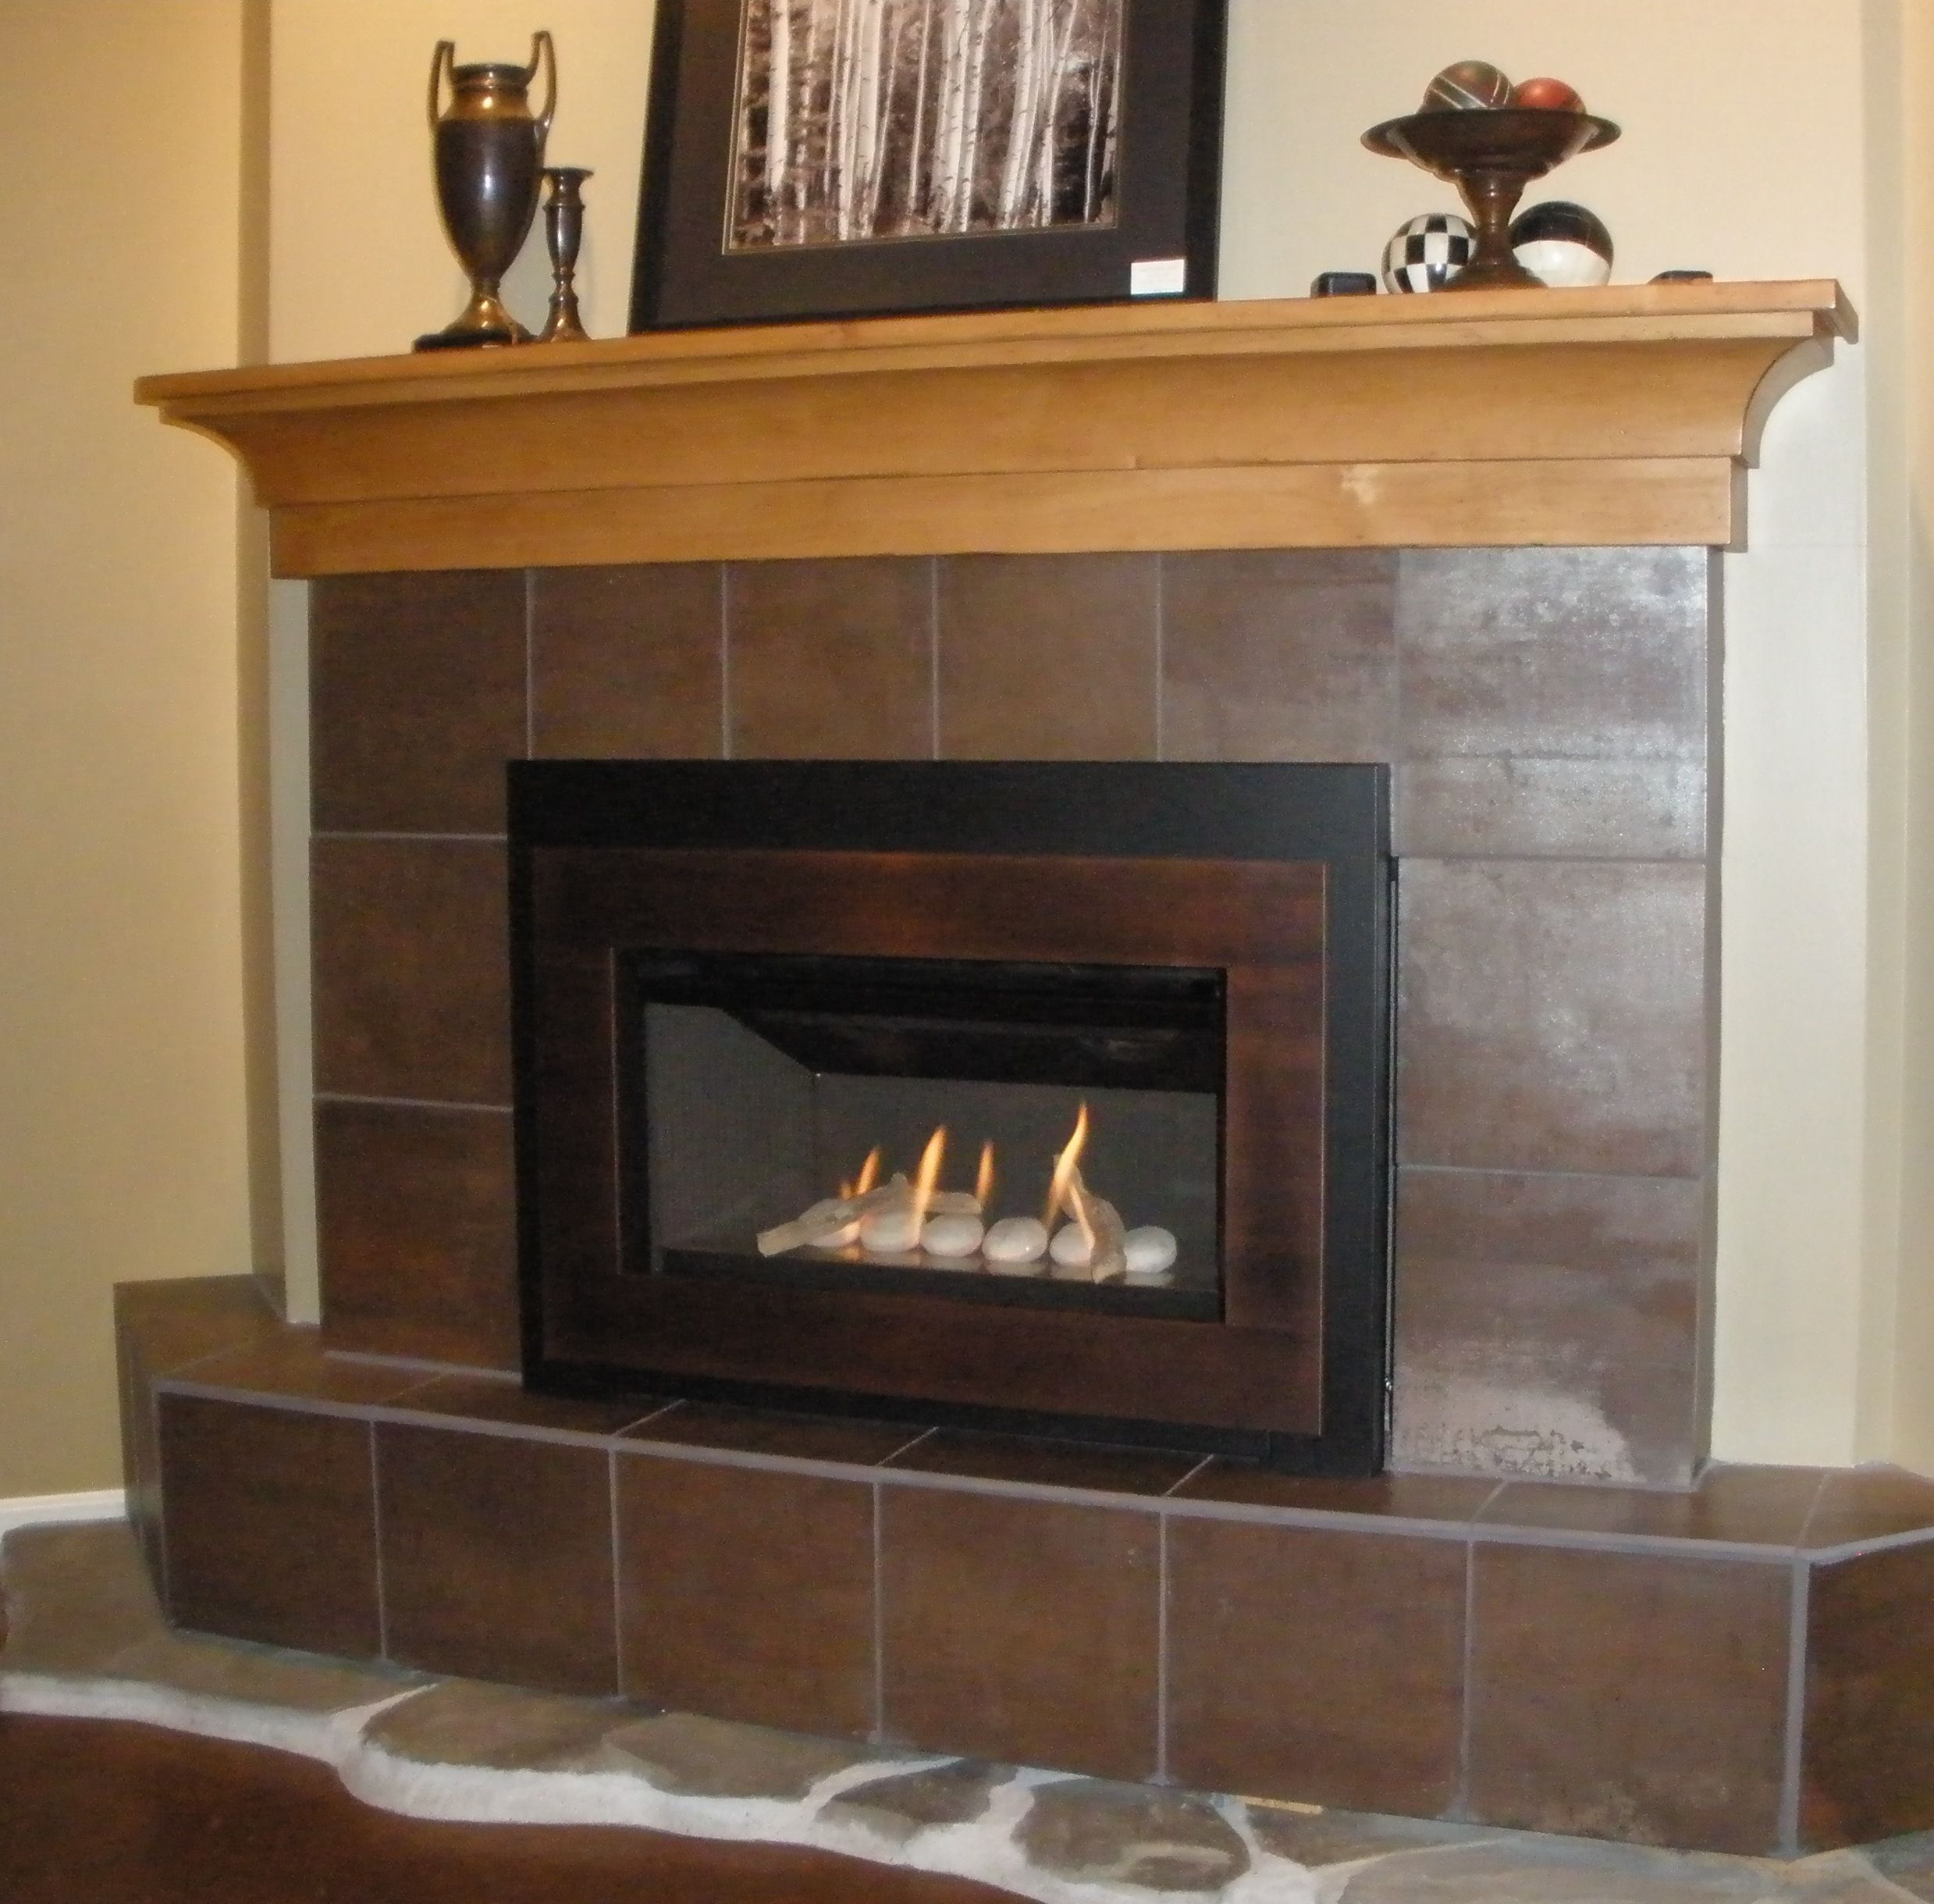 Driftwood Fireplace Mantel Fresh Pin On Valor Radiant Gas Fireplaces Midwest Dealer